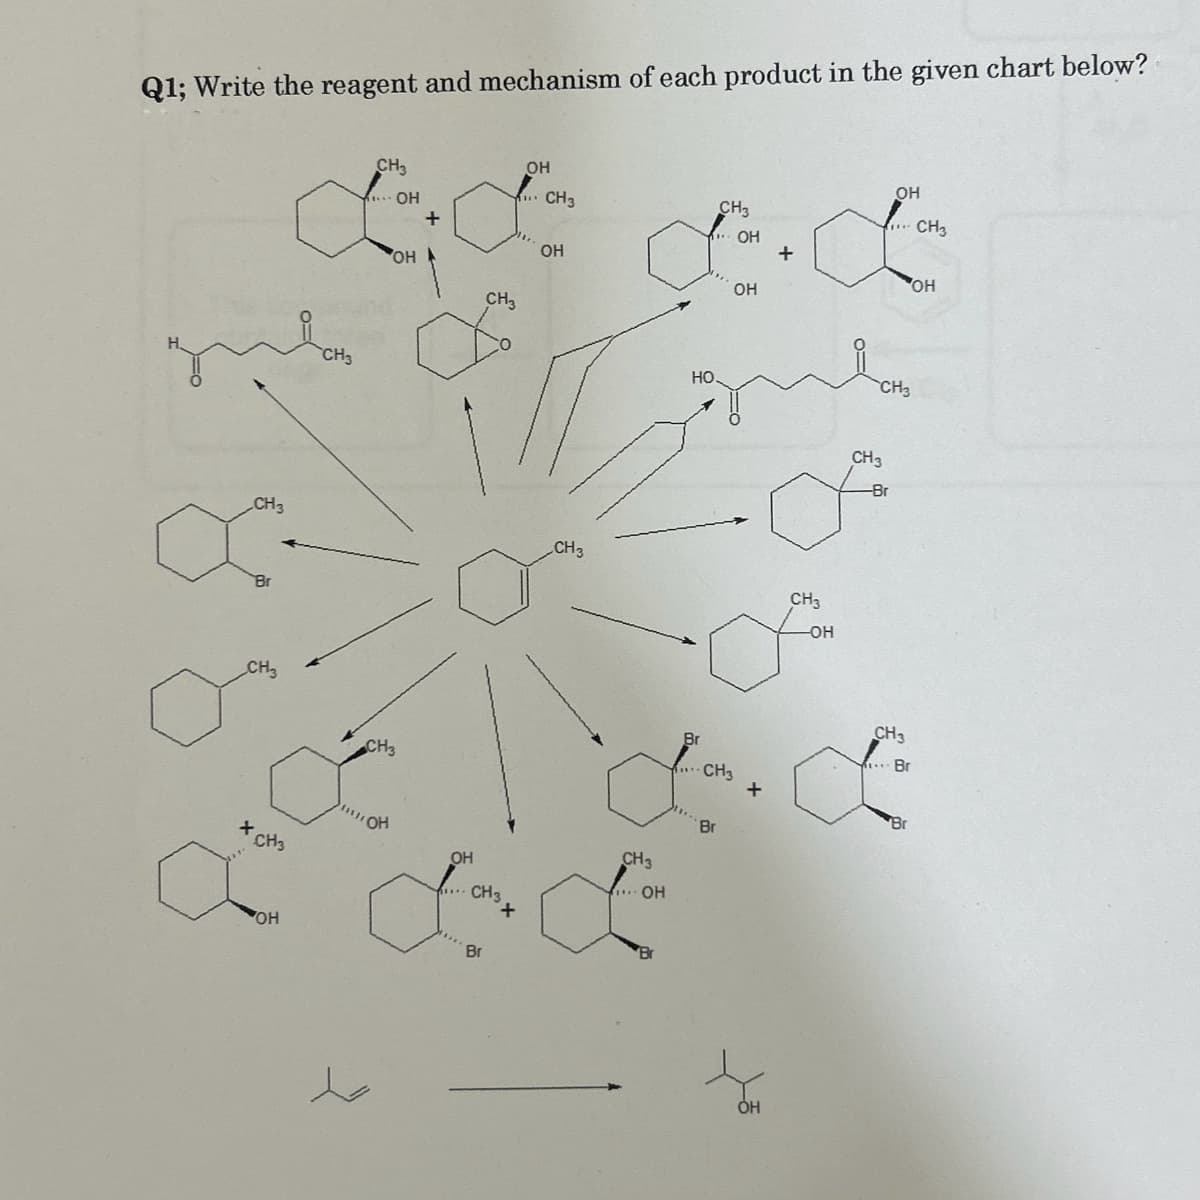 Q1; Write the reagent and mechanism of each product in the given chart below?
ди
CH3
Br
CH3
OH
CH3
CH3
.... OH
OH
CH3
он
а
+
а
OH
CH3
CH3
Br
+
OH
...CH3
OH
CH3
CH3
.... OH
НО
Br
CH3
Br
ОН
OH
..CH3
+
CH3
риво
CH3
ОН
OH
.... CH3
CH3
-OH
-Br
OH
CH3
Br
Br